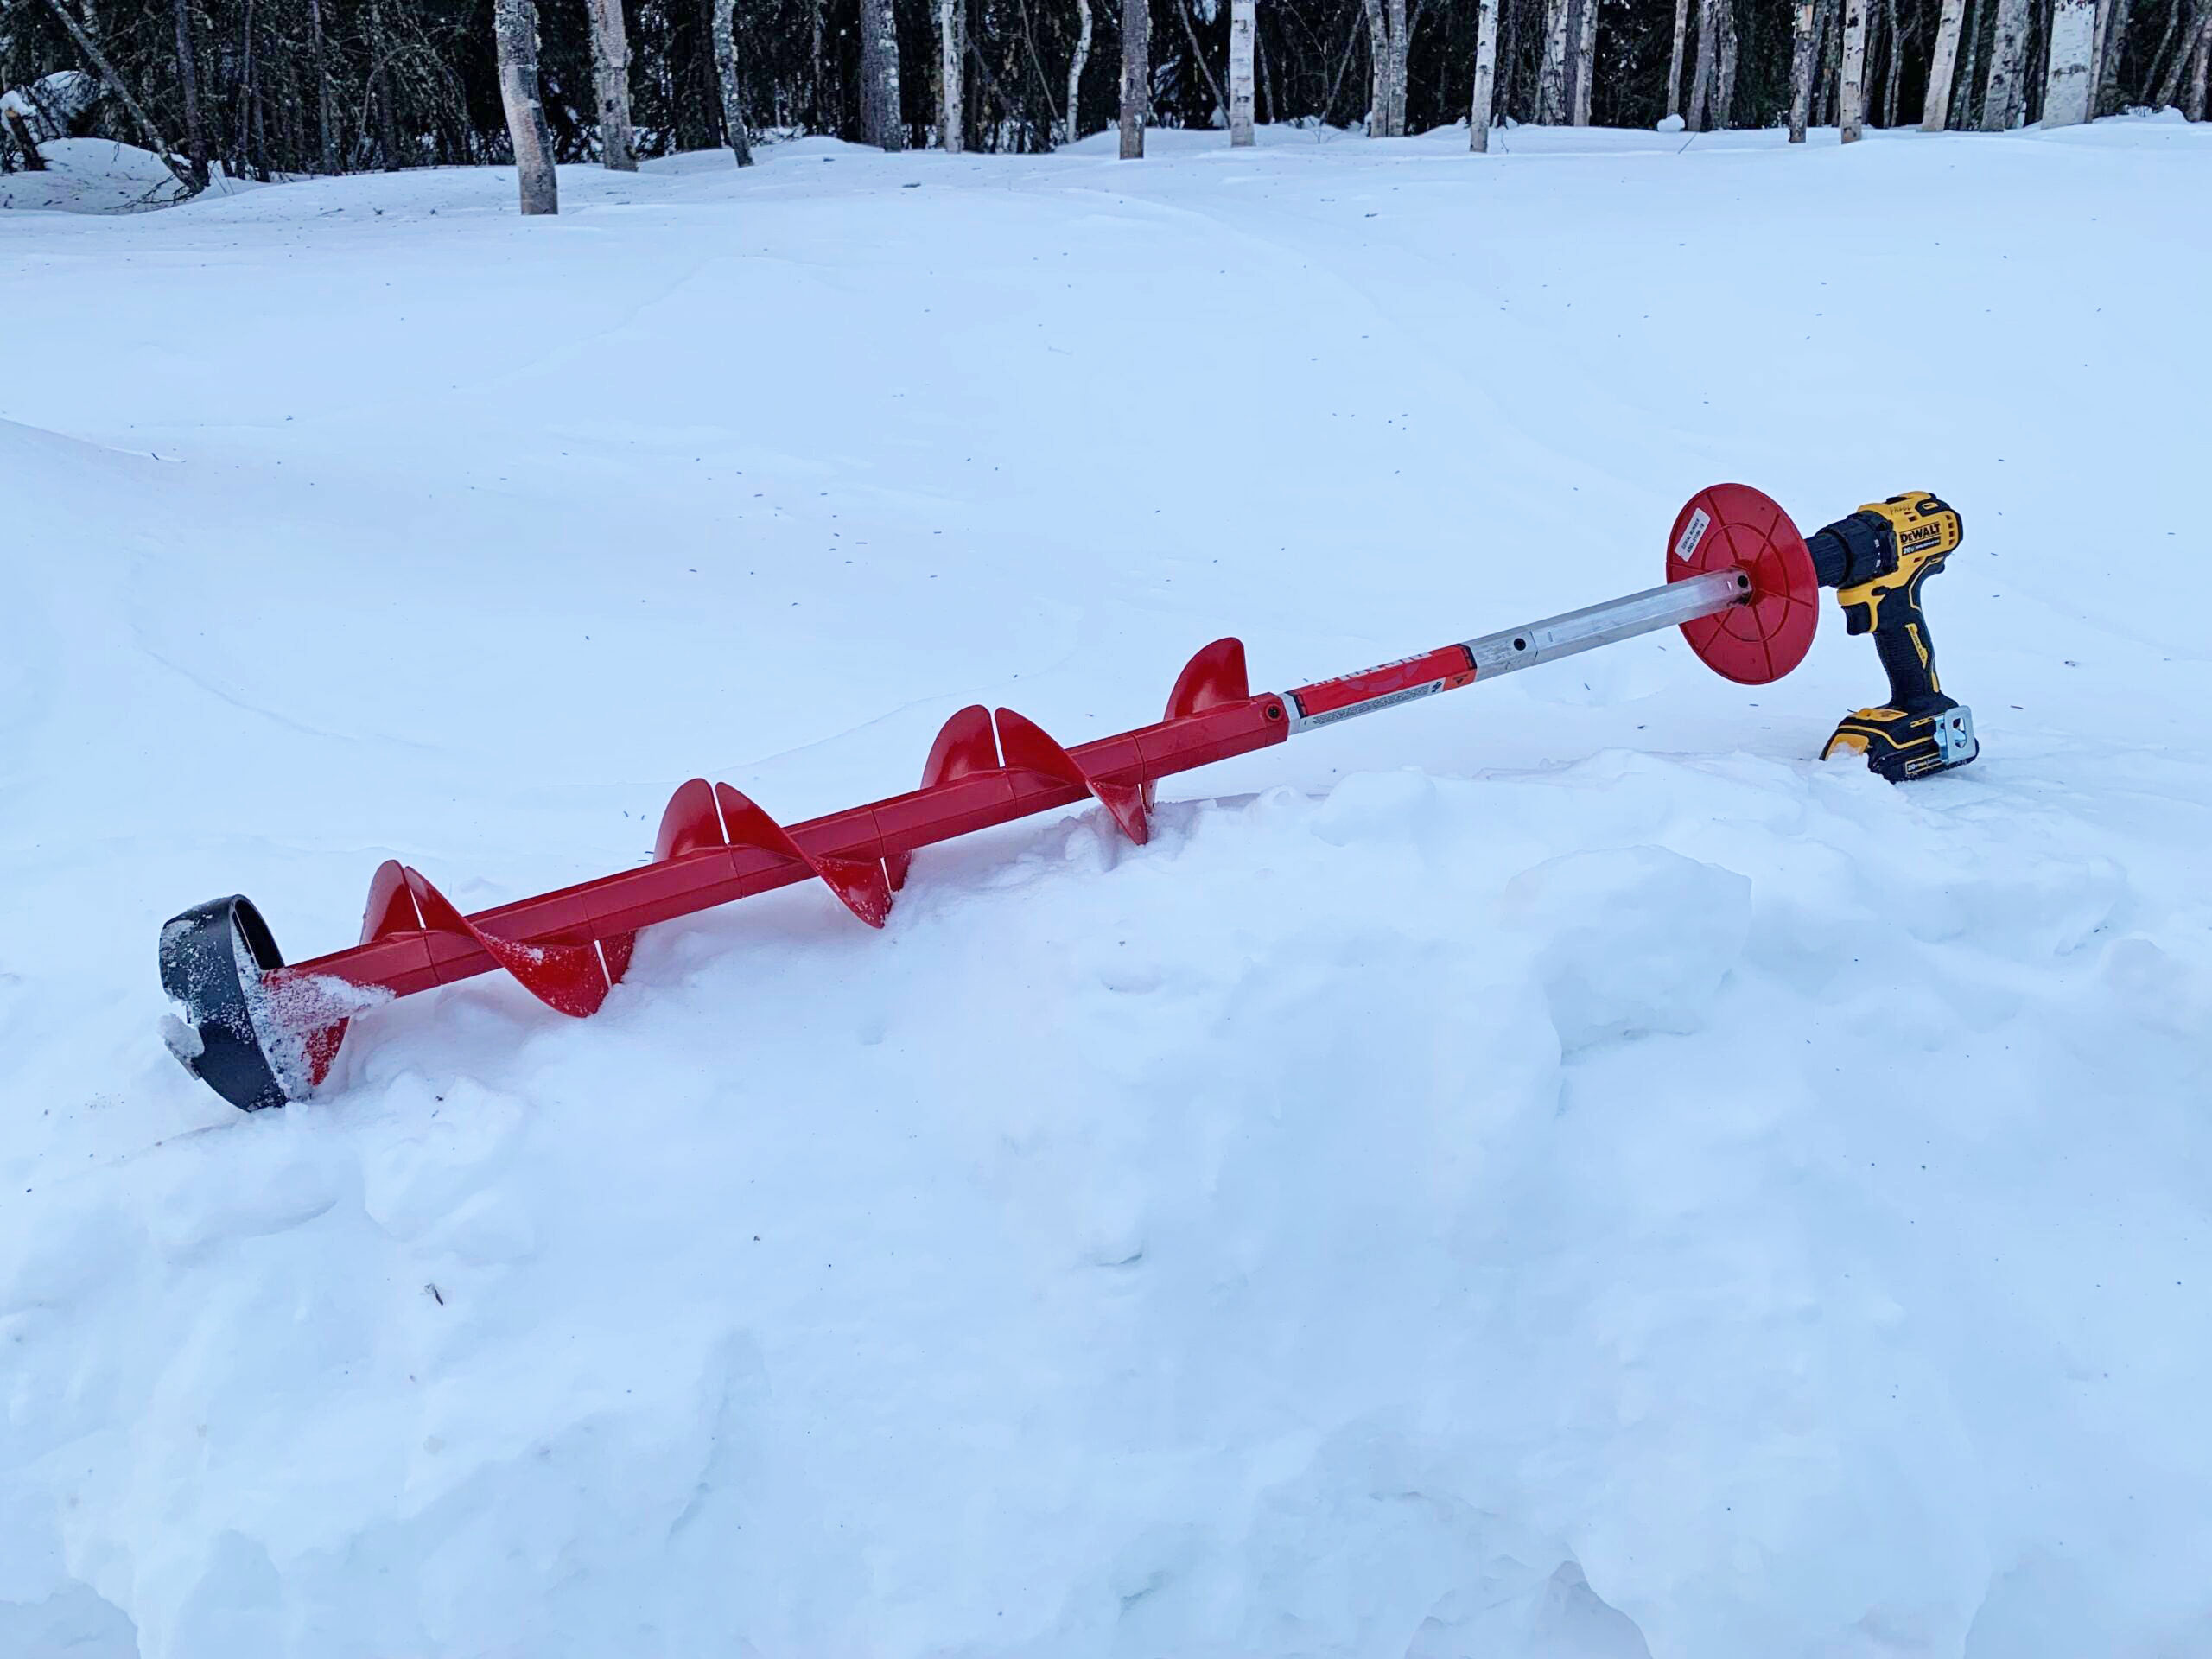 Drill-Powered Augers: Gimmick or Serious Ice-Fishing Tool?